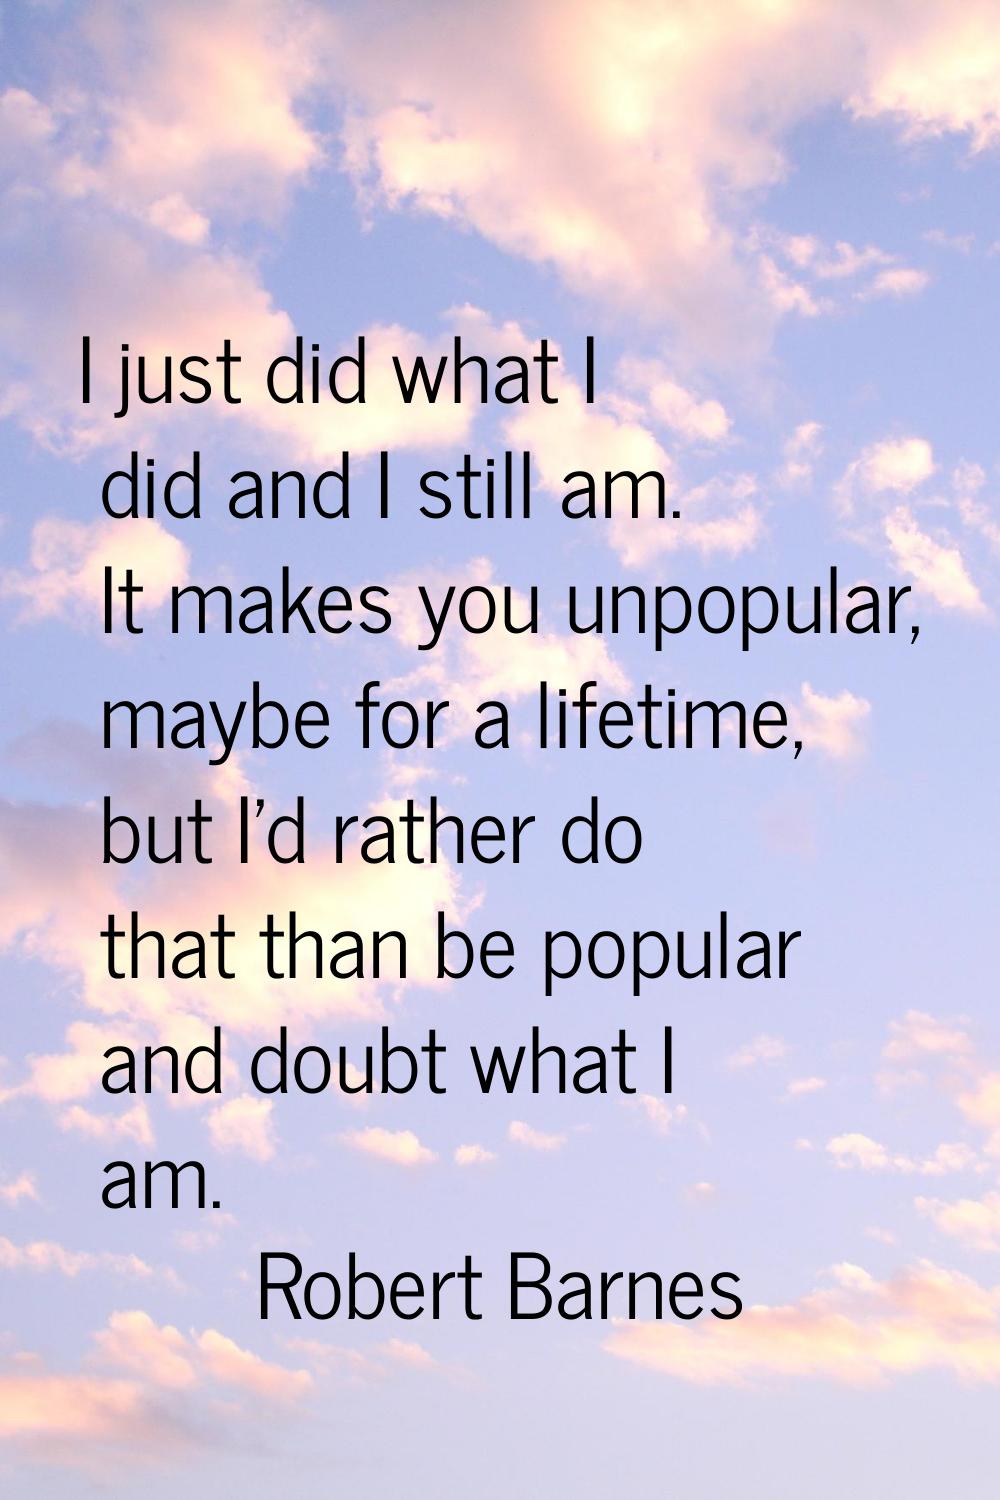 I just did what I did and I still am. It makes you unpopular, maybe for a lifetime, but I'd rather 